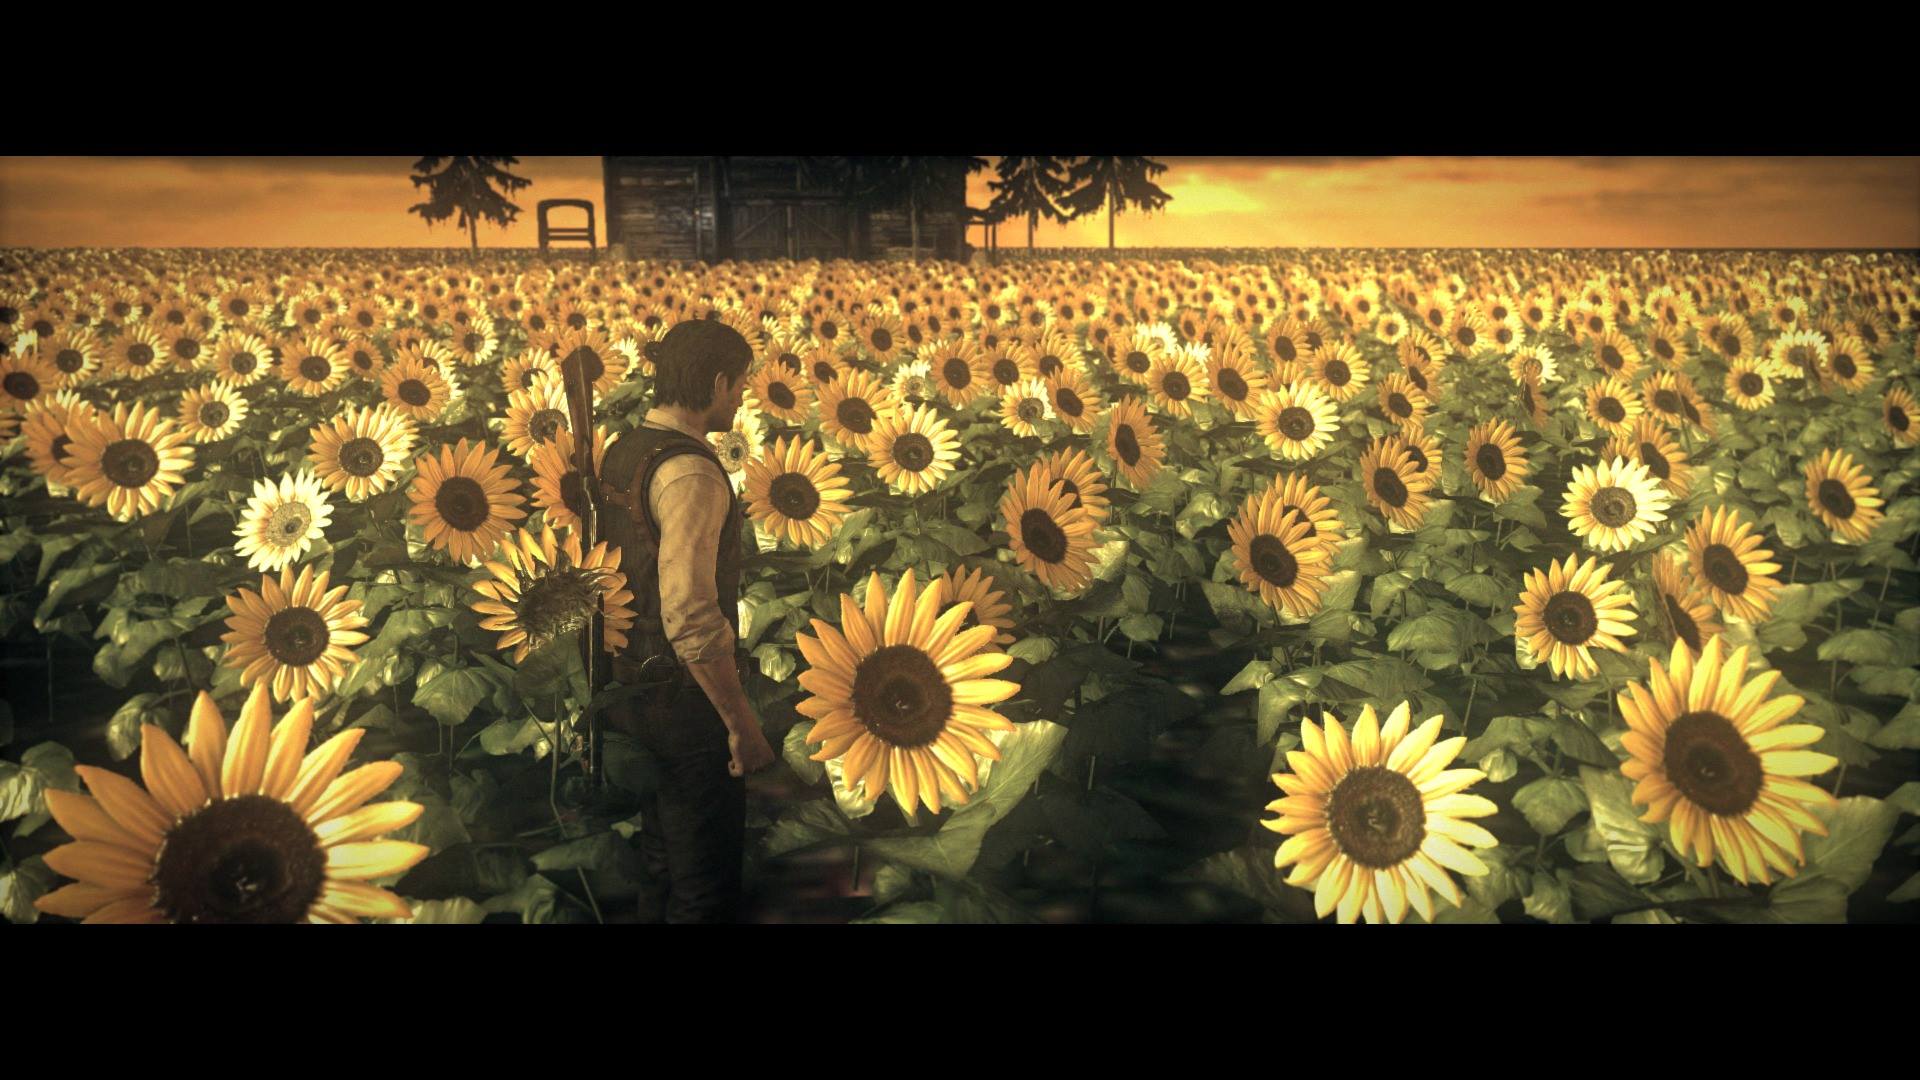 Surreal Moment Amongst the Sunflowers